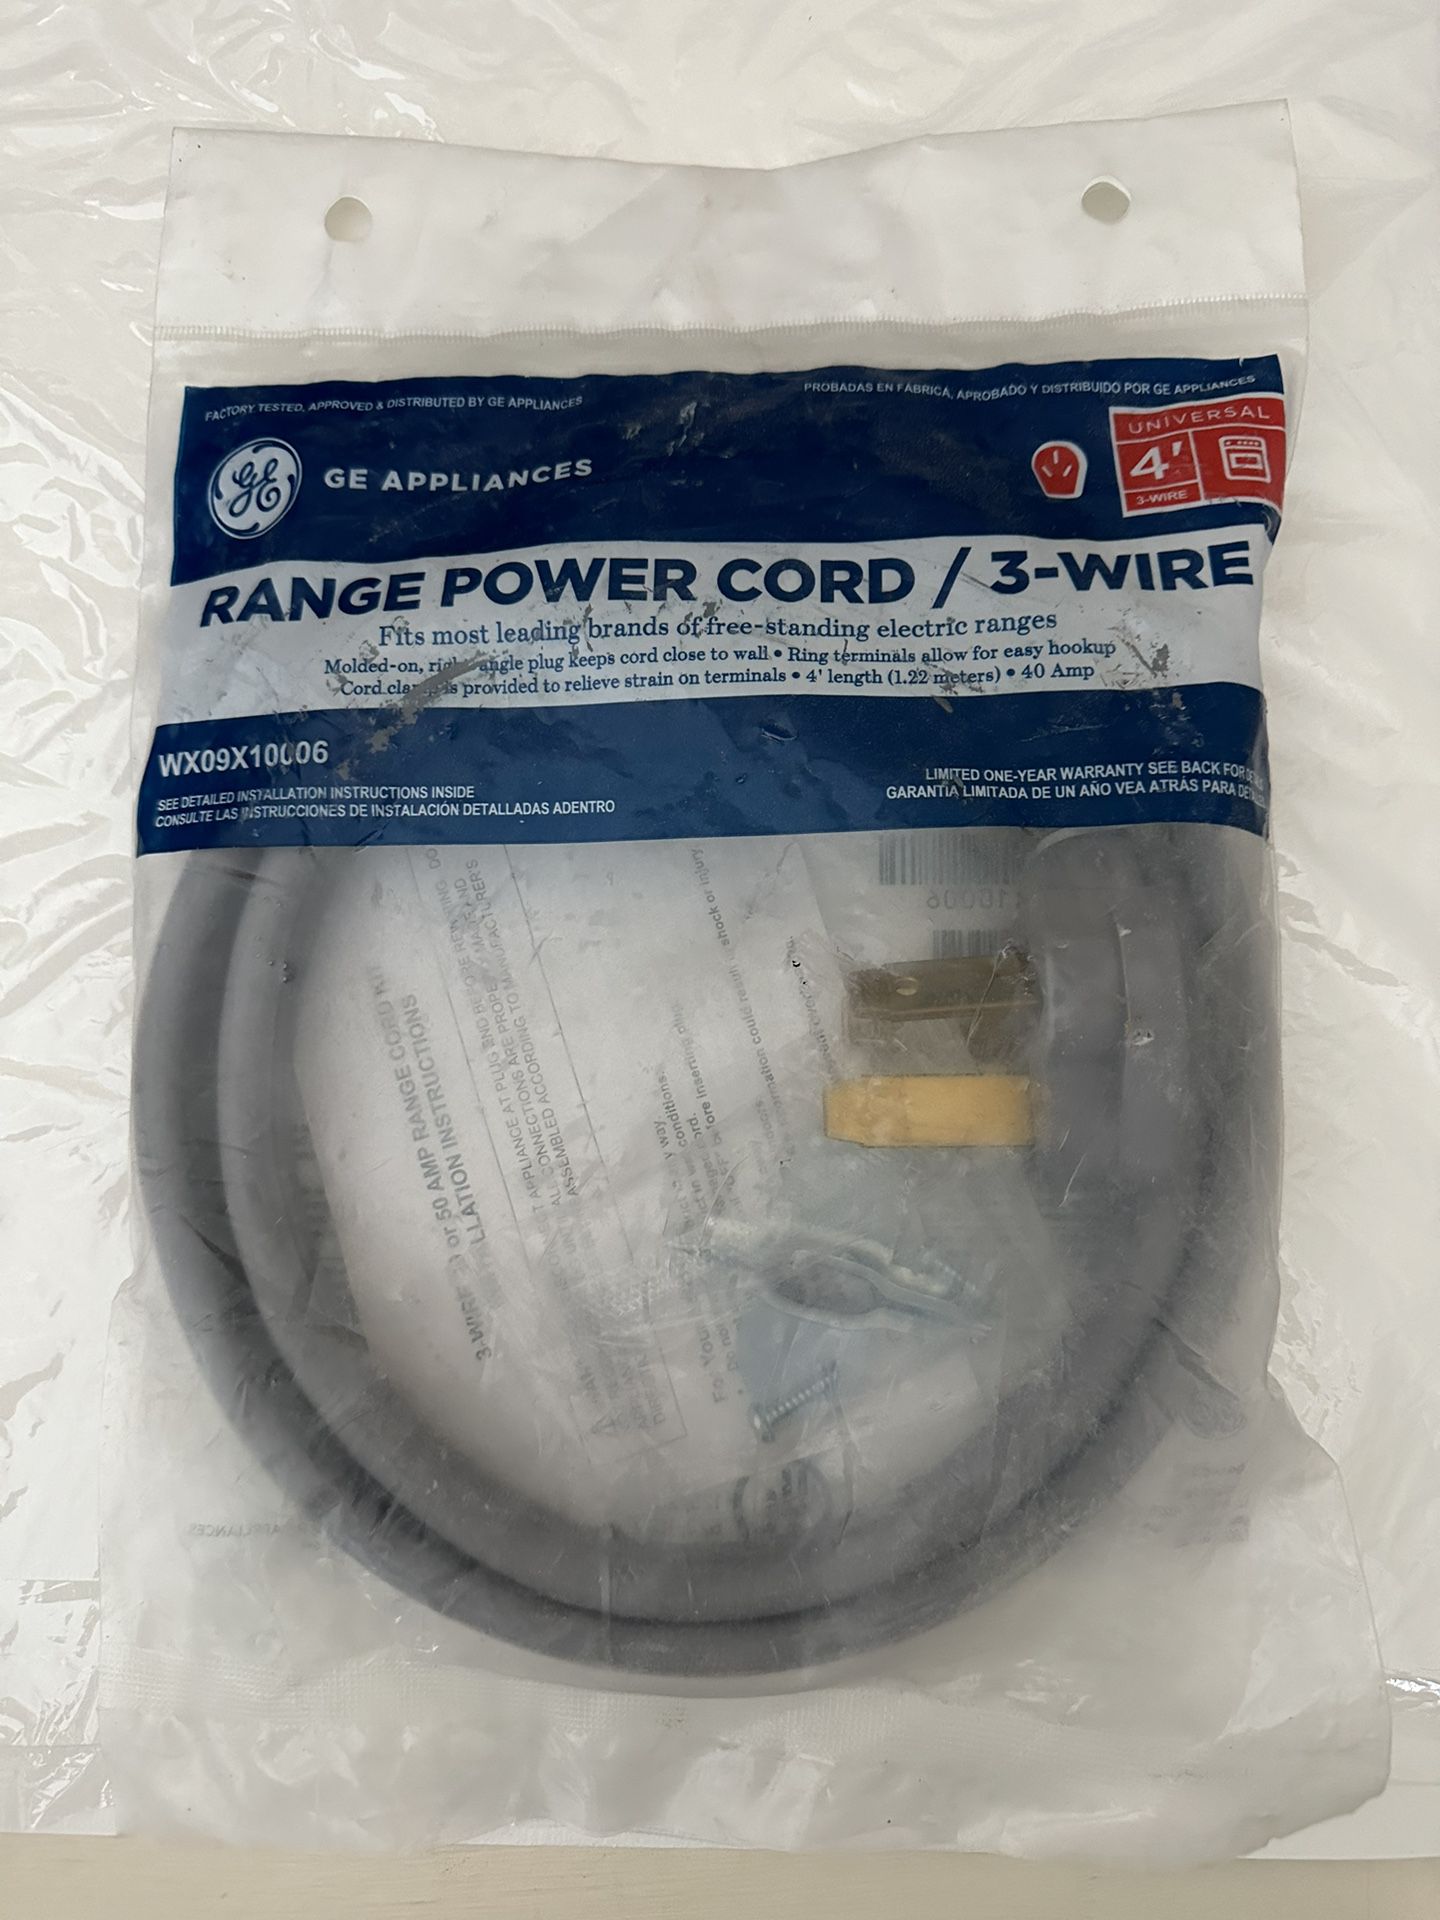 GE Range Power Cord- 4 Foot 3 Wire- New